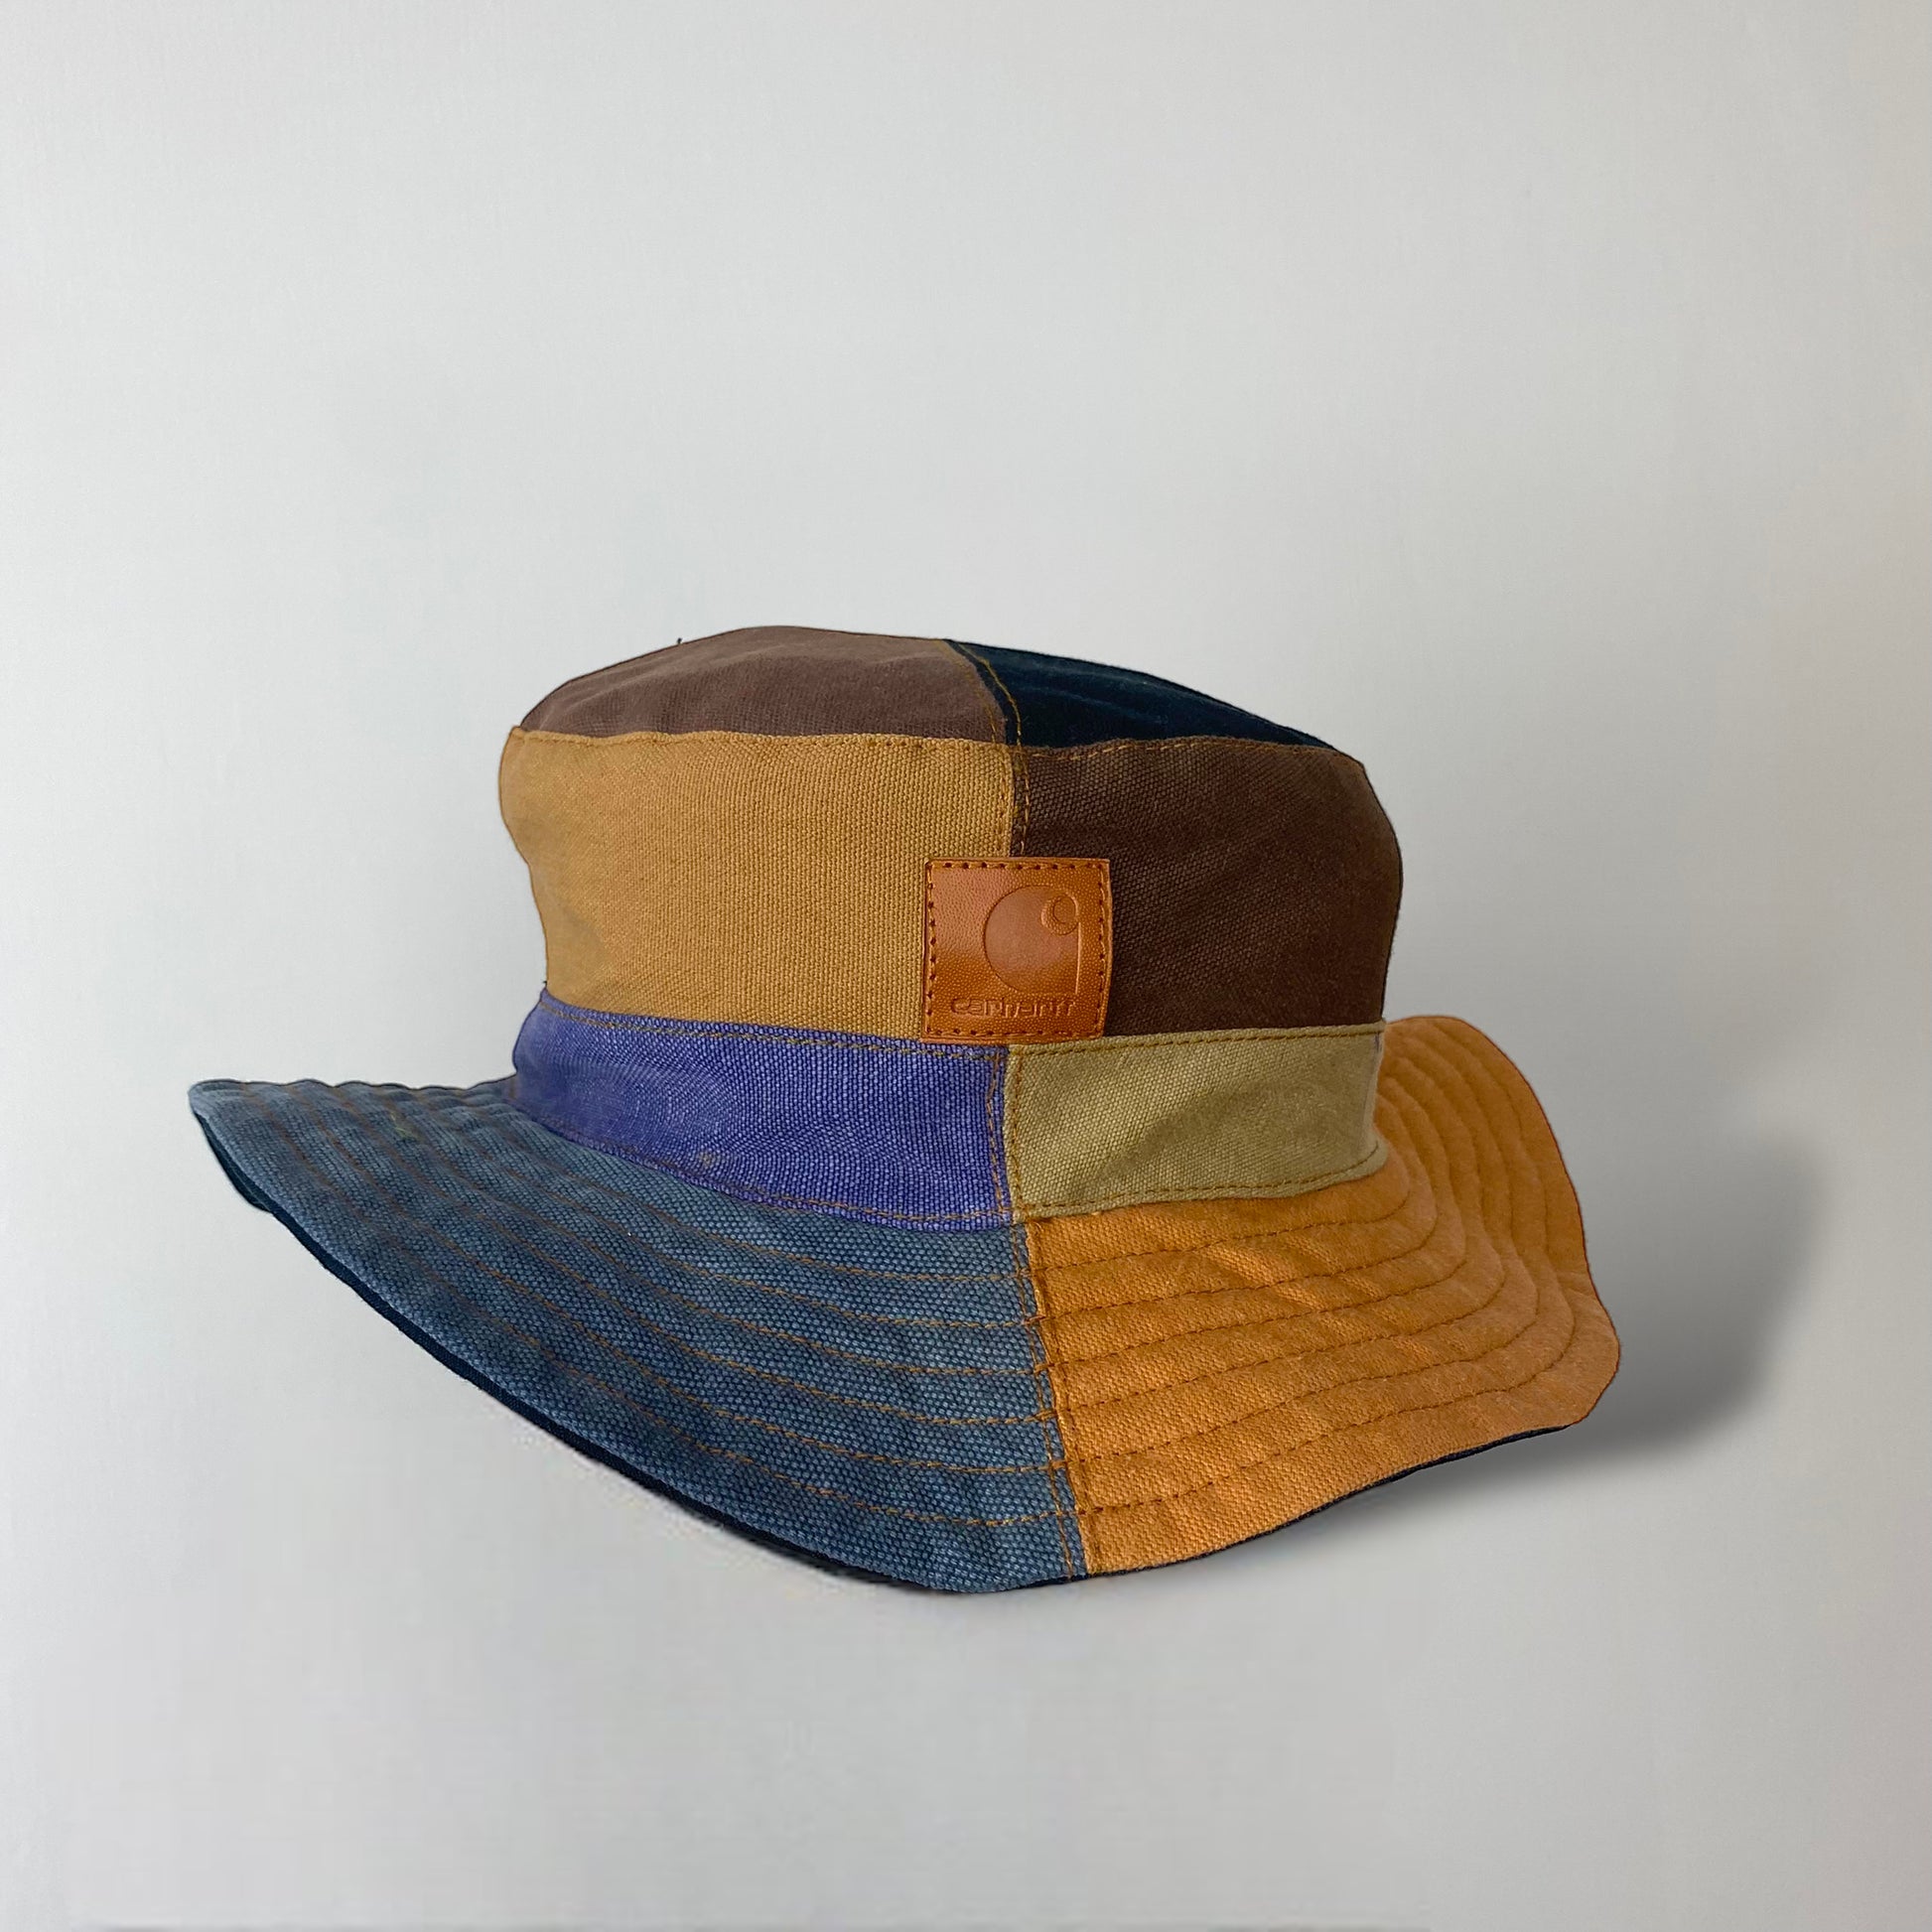 Carhartt Reworked Bucket Hat  Vintage-Inspired & Timeless –  corderycollection